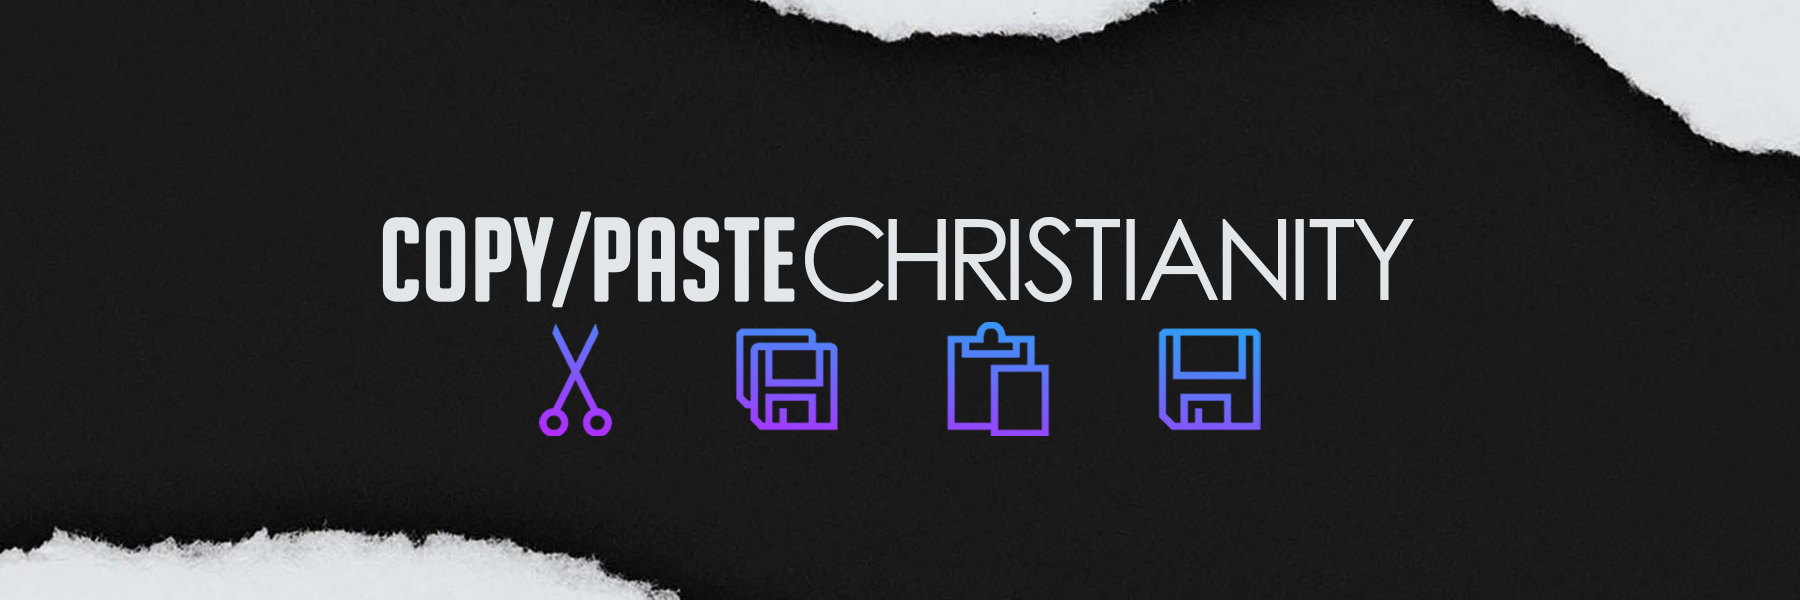 Copy and Paste Christianity